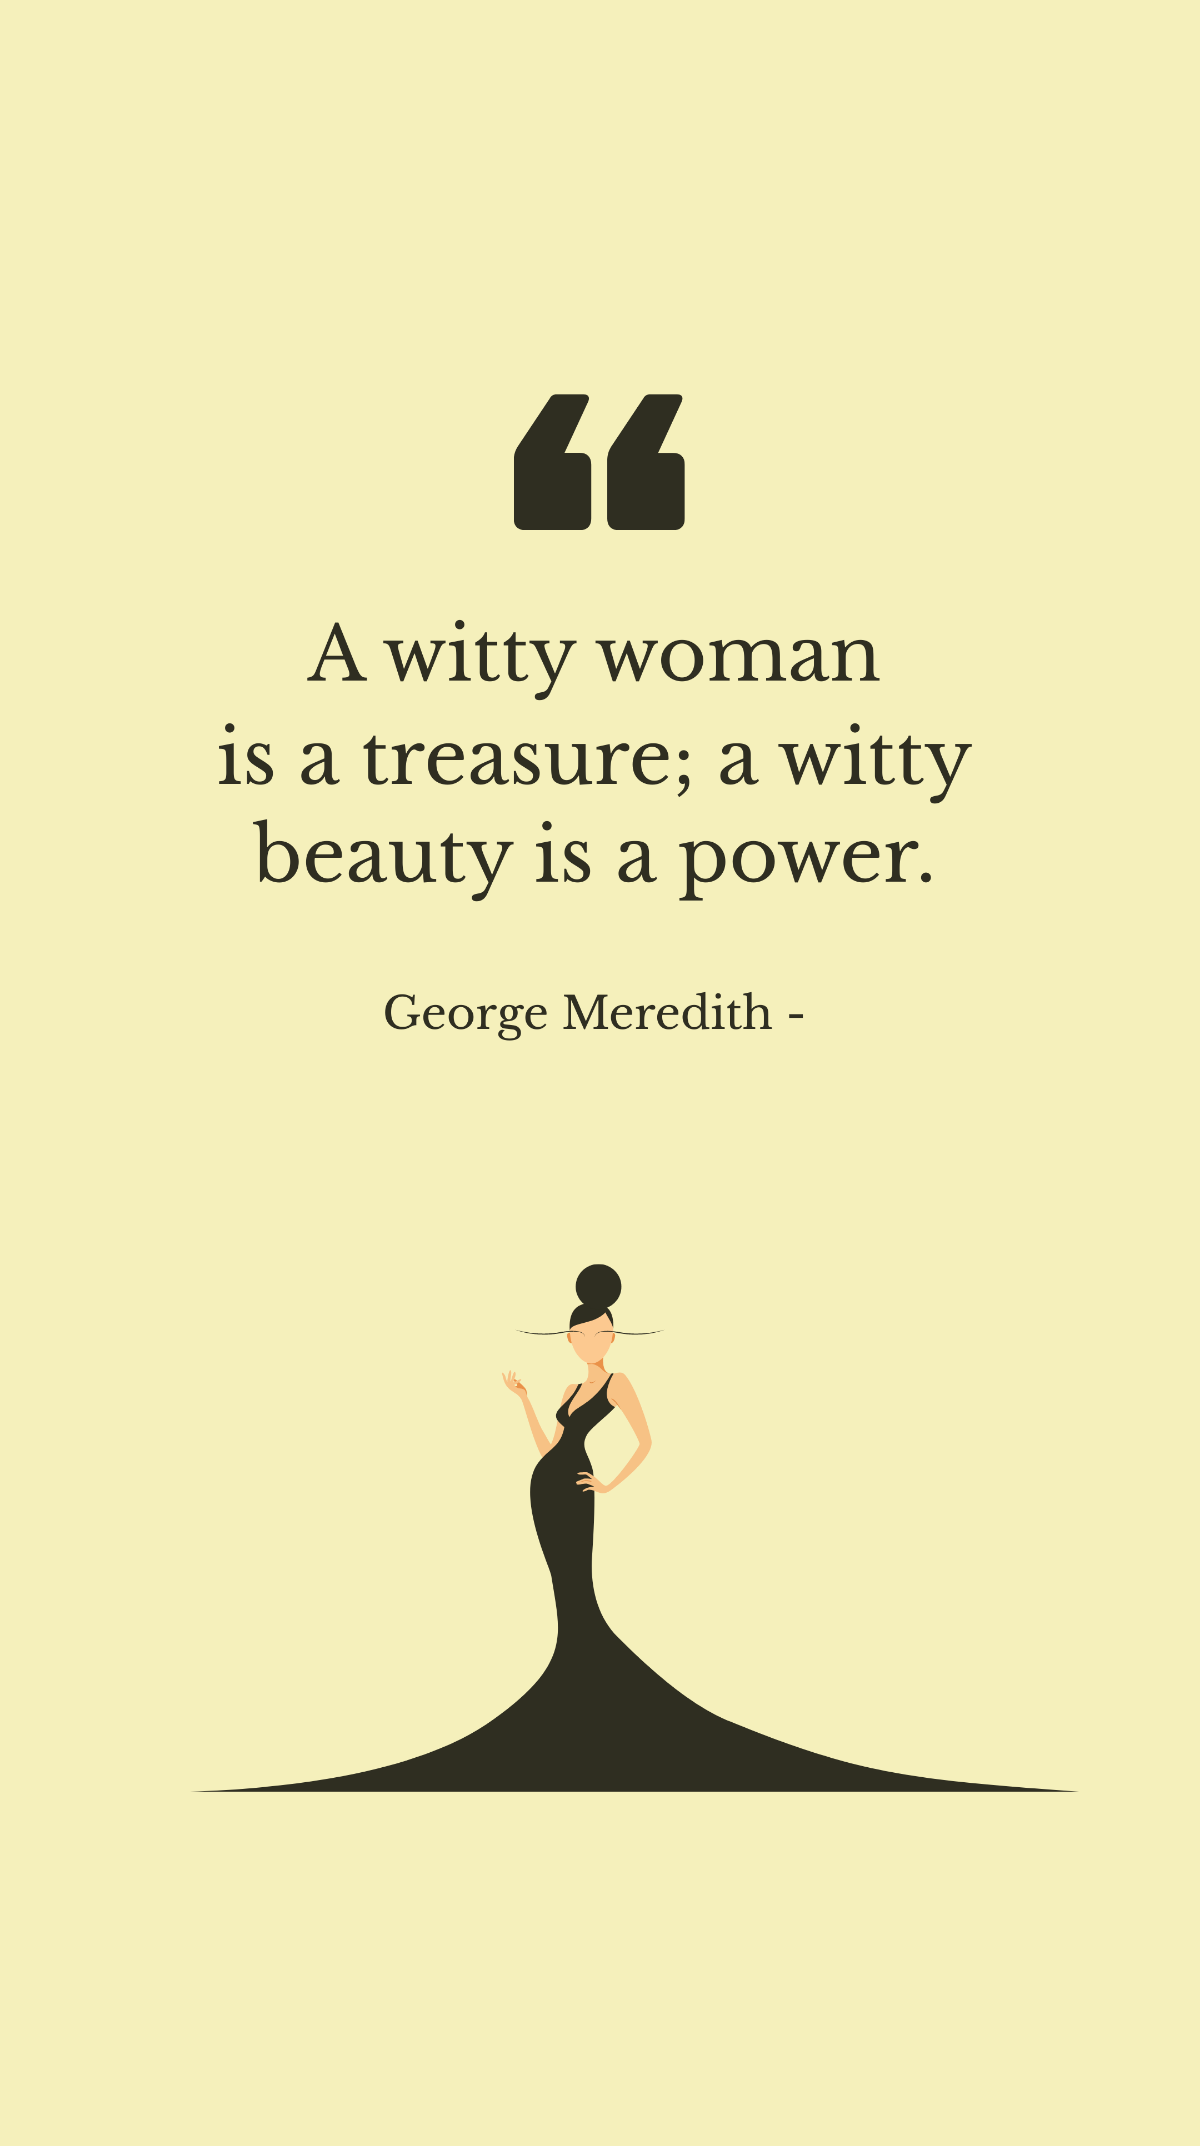 George Meredith - A witty woman is a treasure; a witty beauty is a power. Template